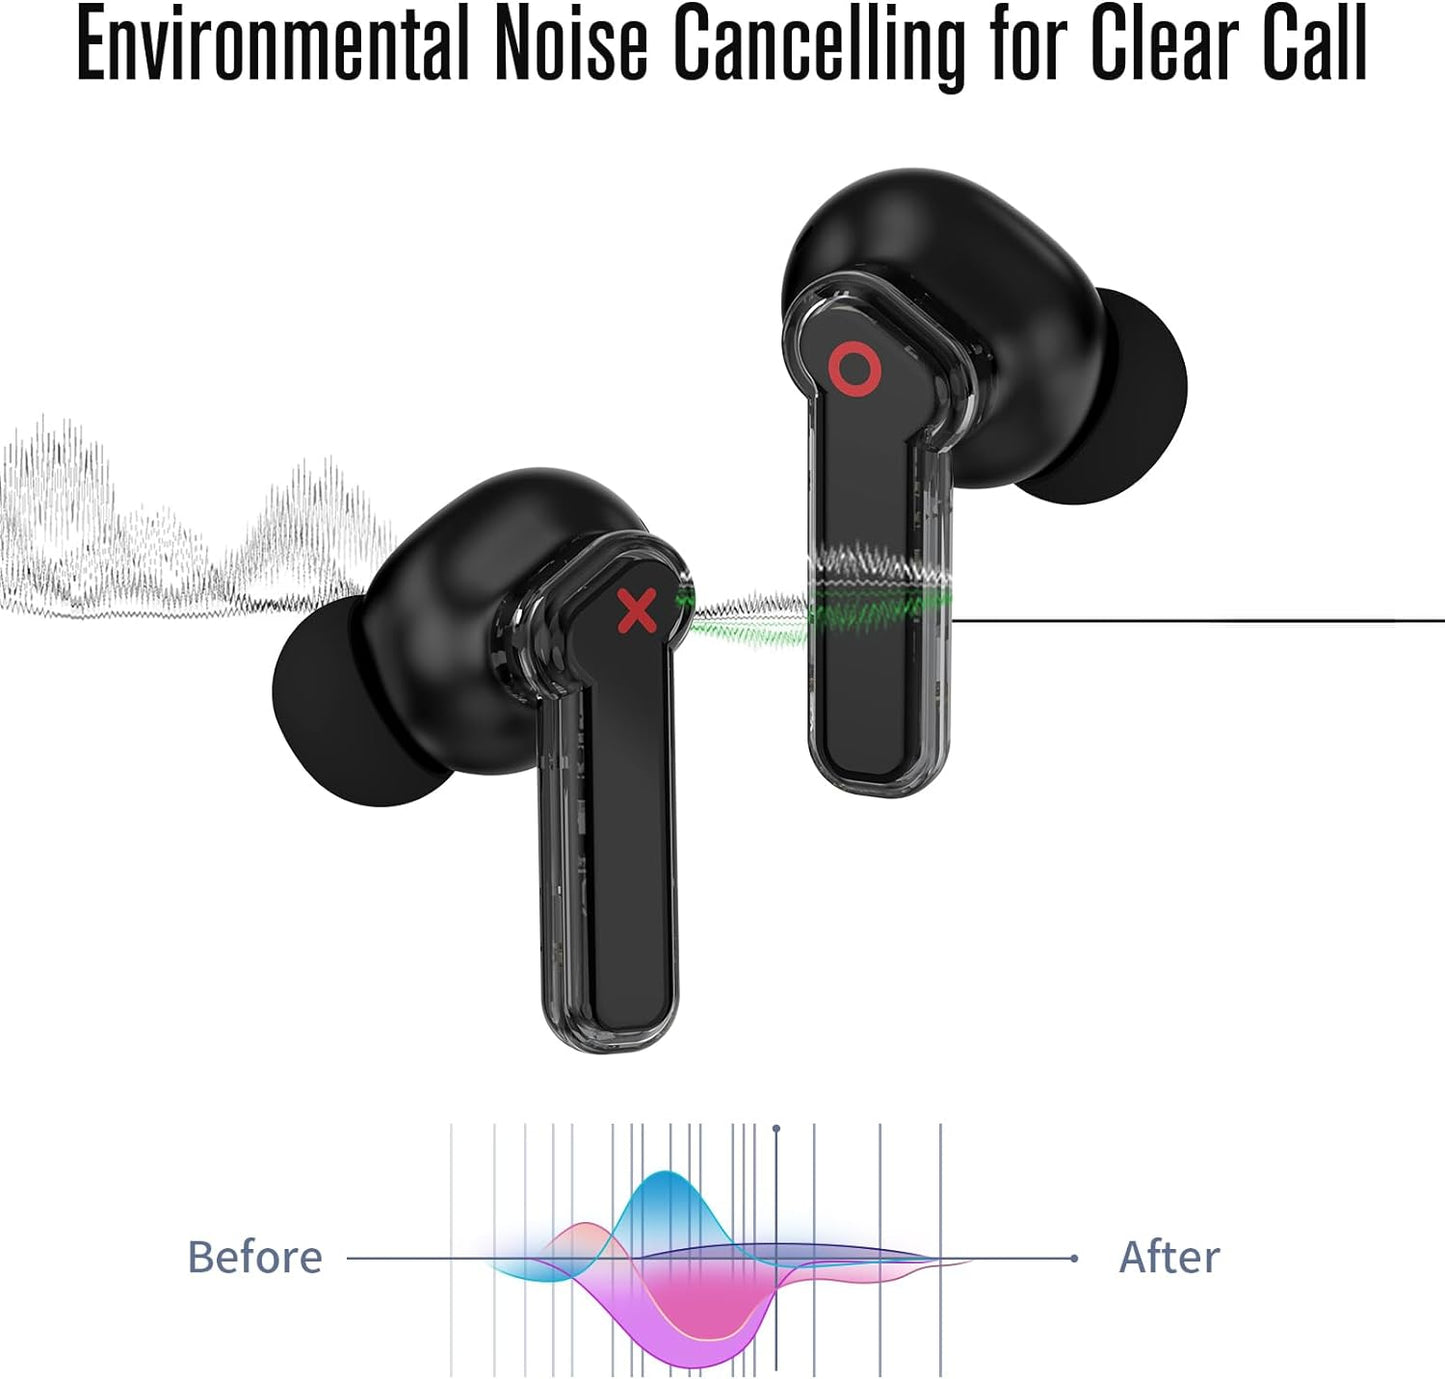 Crystalbuds Wireless Earbuds Active Noise Cancelling, Transparent Bluetooth 5.3 Headphones, Ear Buds 35Db Noise Cancelling, Earphones with Wireless Charging Case for Iphone Android Gaming Laptop TV